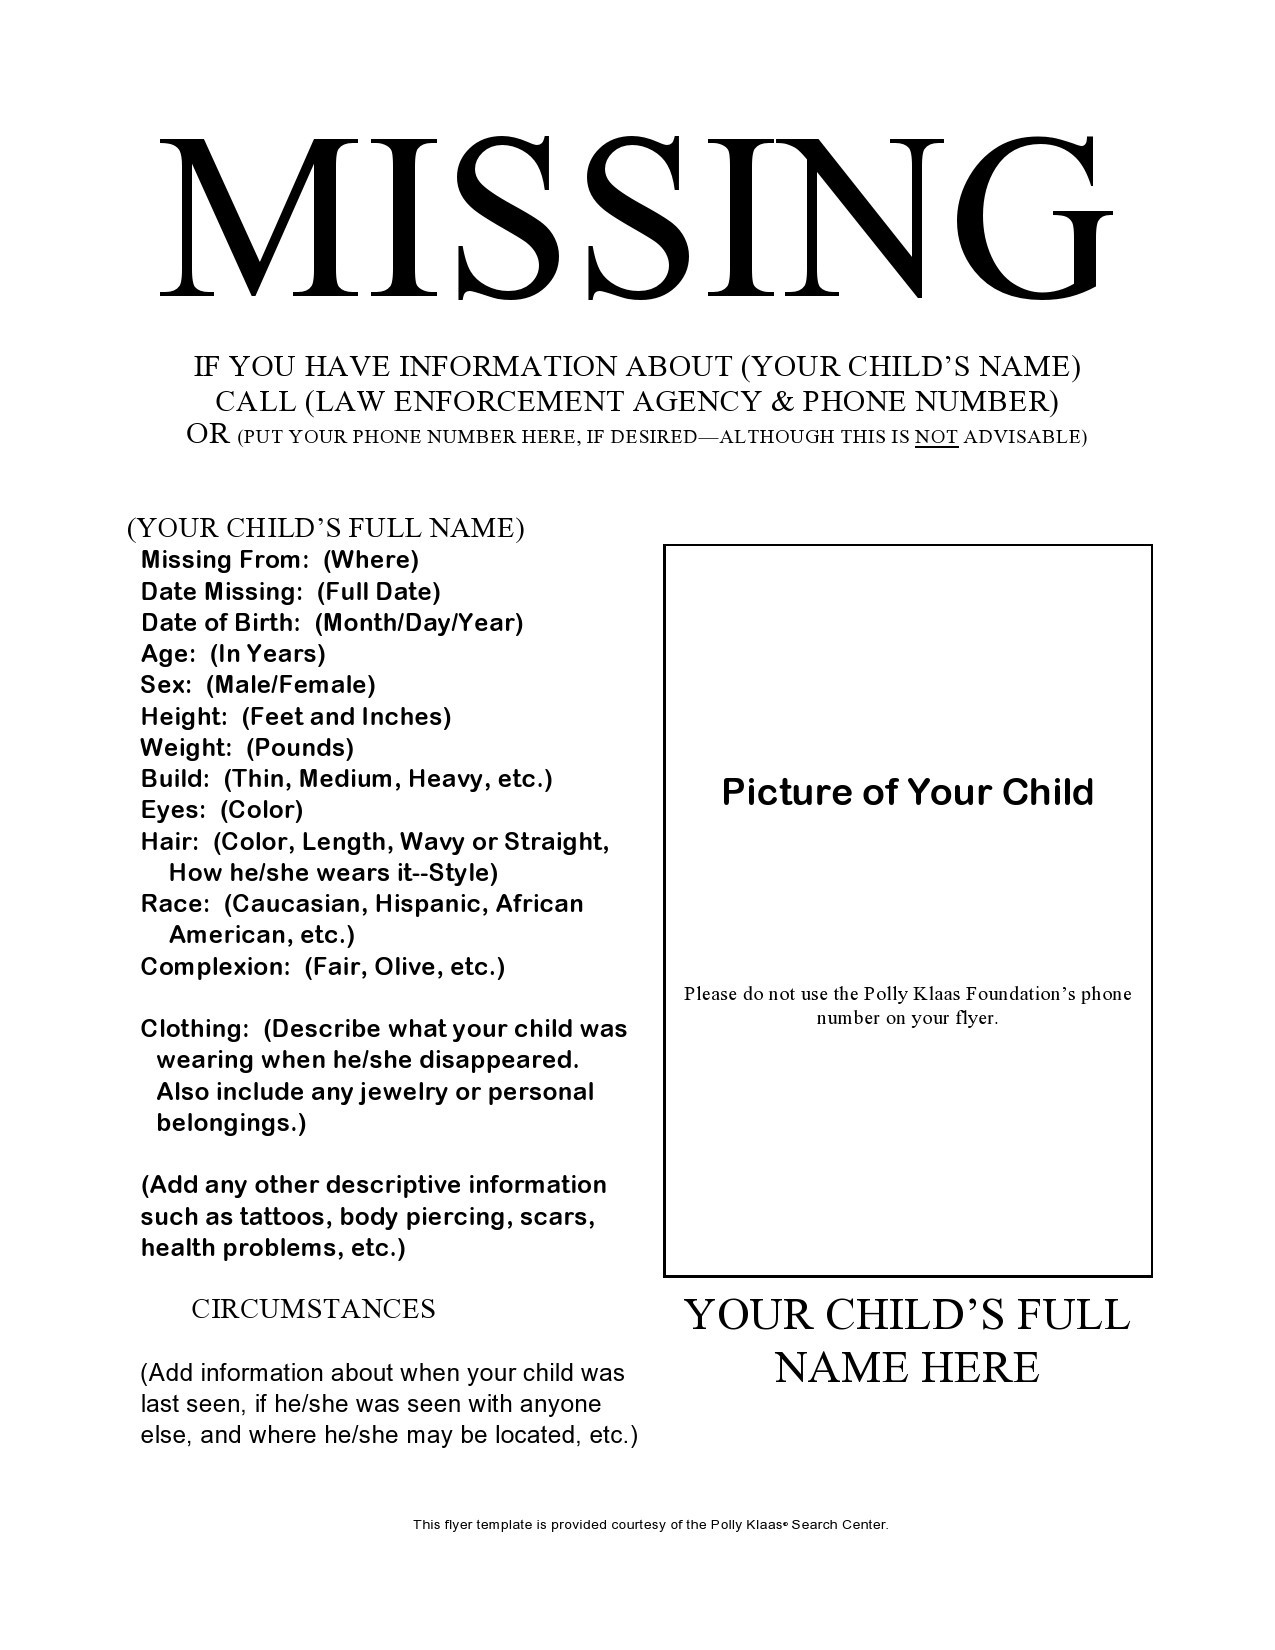 Free missing poster template 07